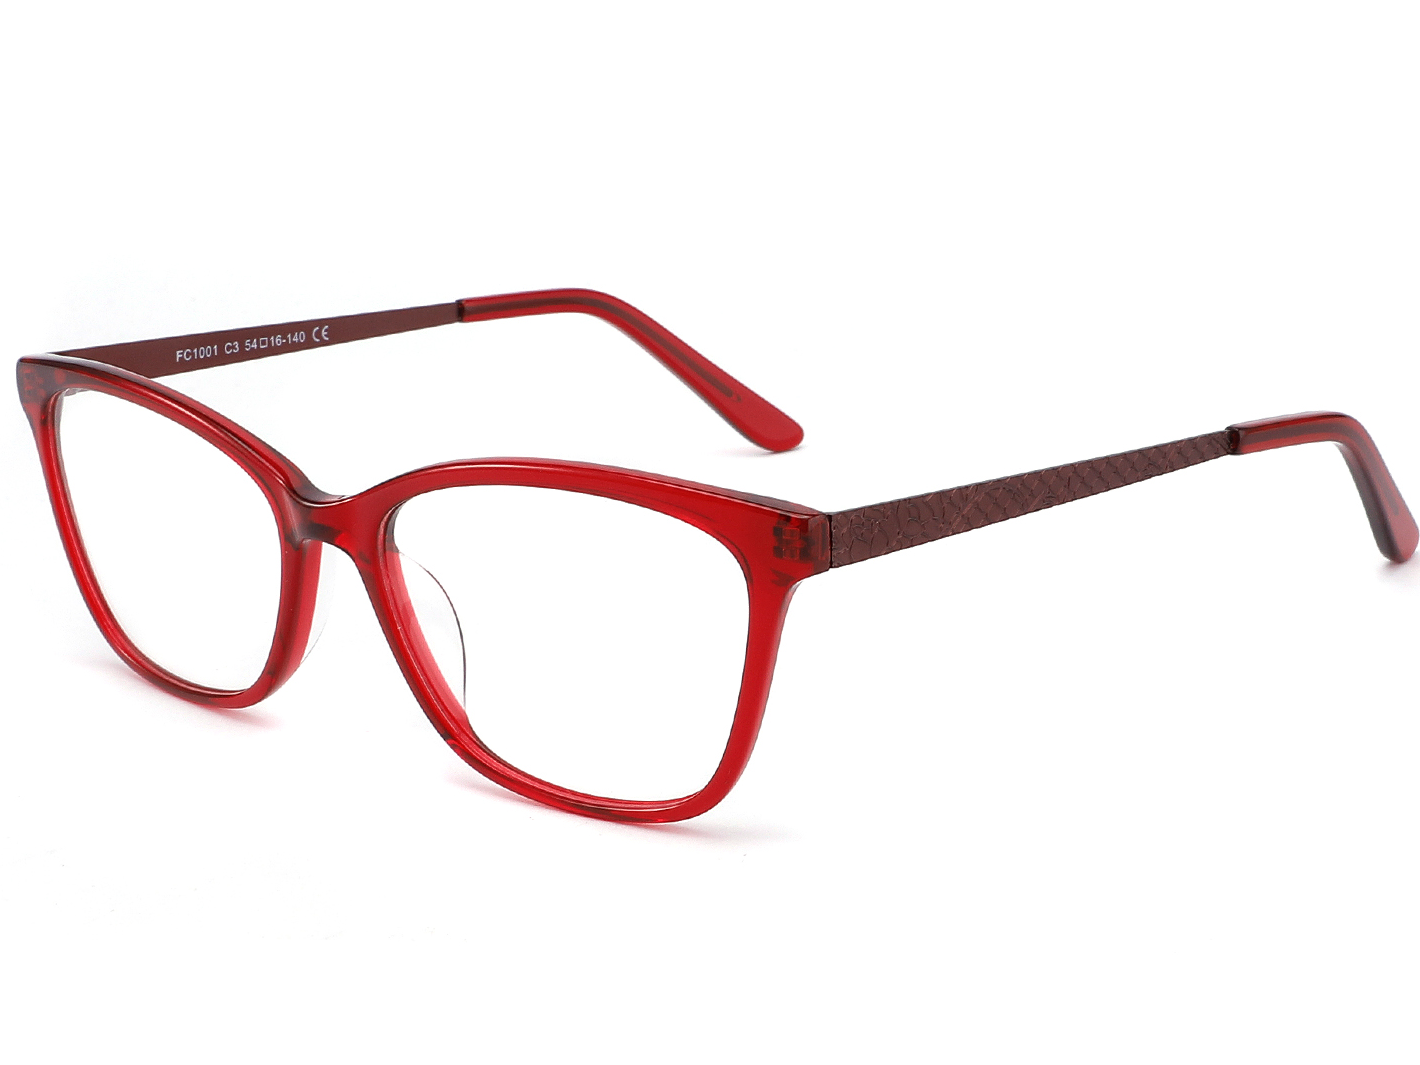 YD-1001 | Frame size: 54-16-140 Casual / Delicate / Joviality | Noble ...